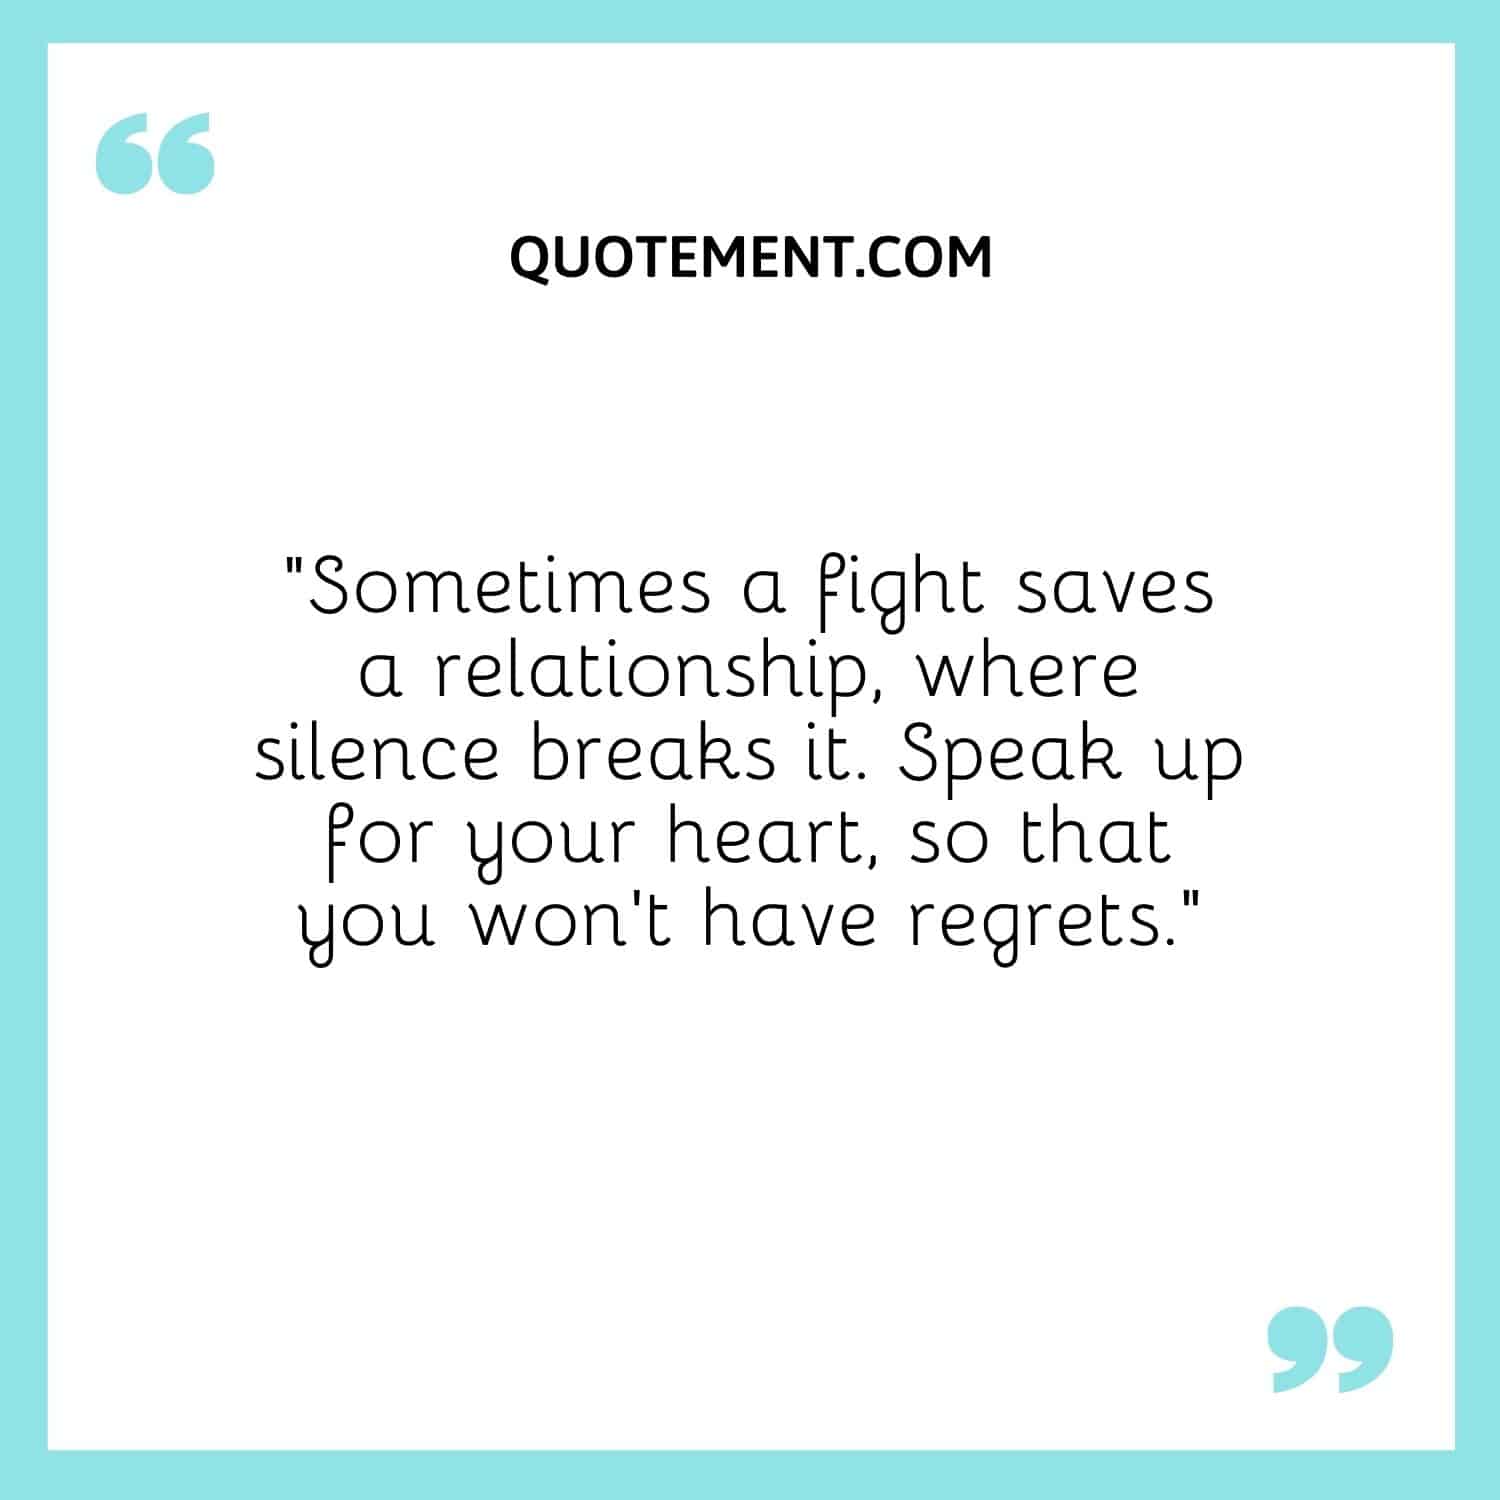 “Sometimes a fight saves a relationship, where silence breaks it. Speak up for your heart, so that you won't have regrets.”